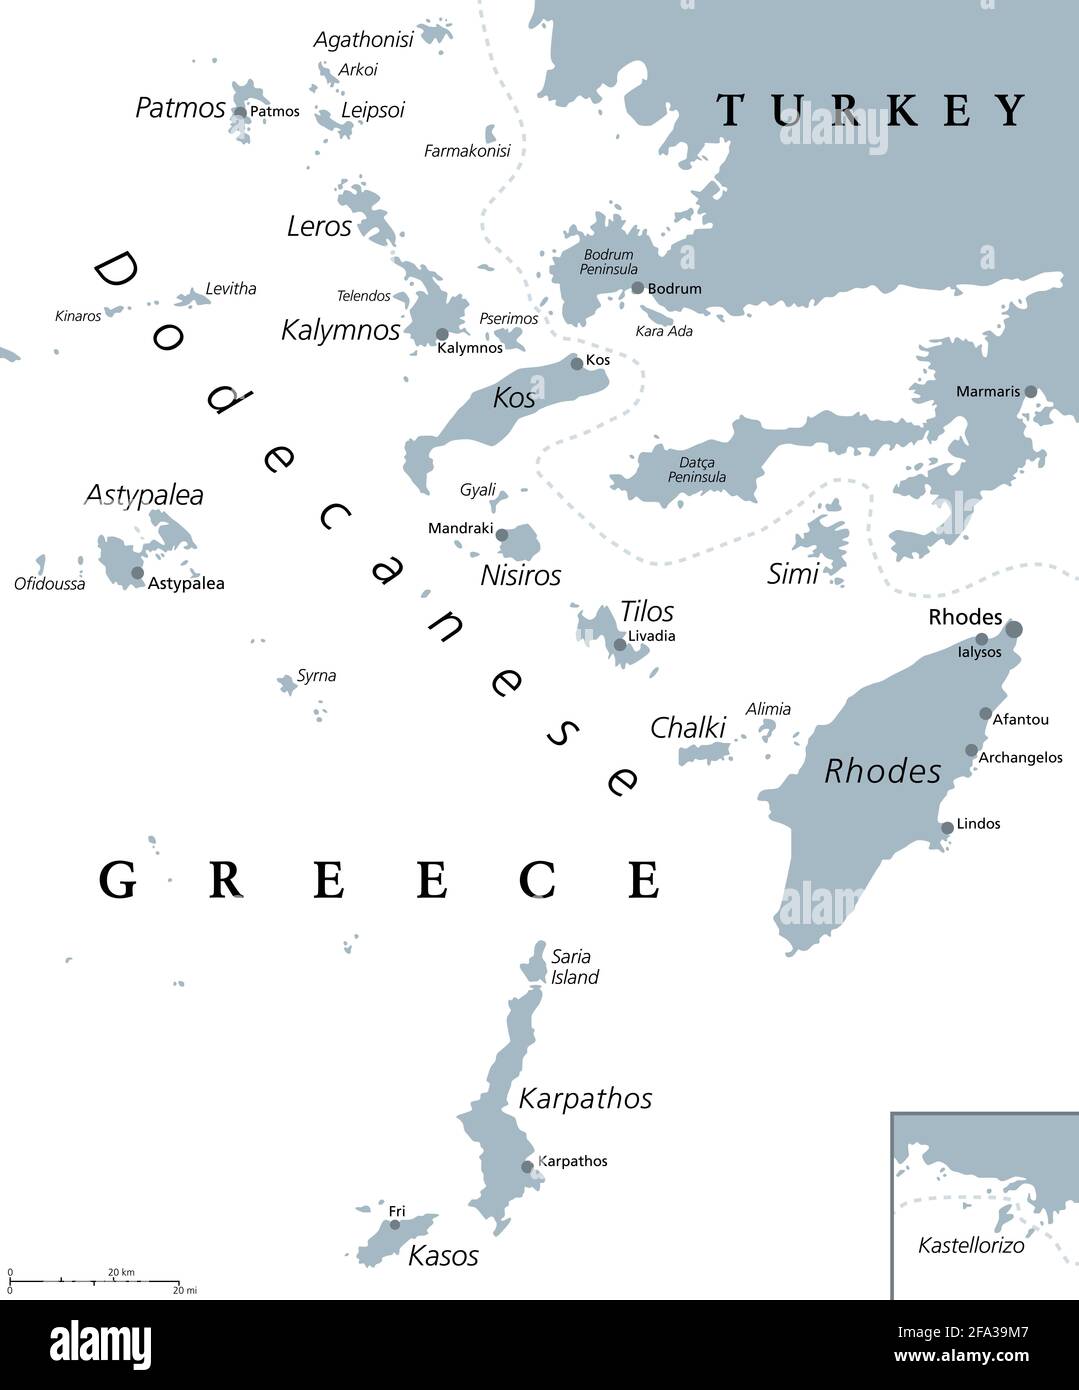 Dodecanese islands, gray political map. Greek island group in the southeastern Aegean Sea and Eastern Mediterranean  off the coast of Turkey. Stock Photo